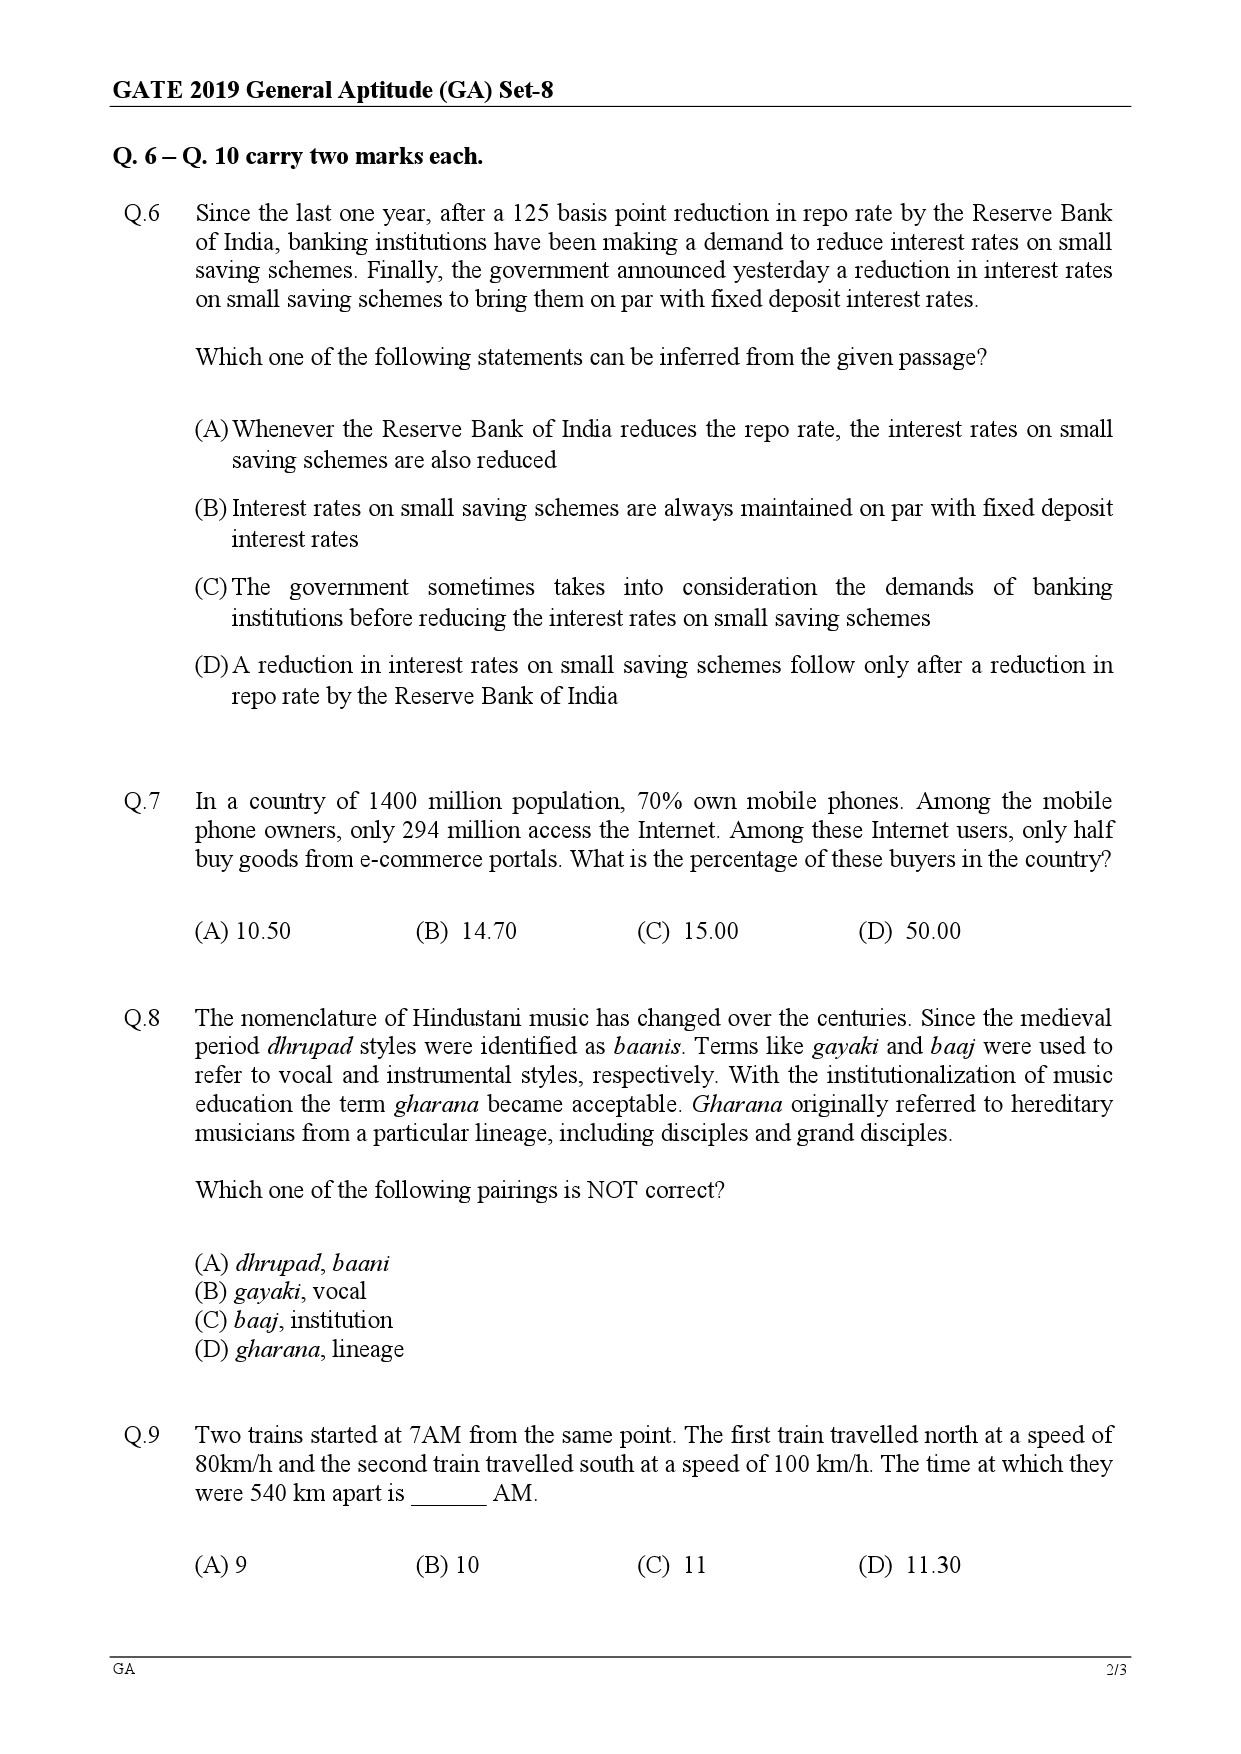 GATE Exam Question Paper 2019 Ecology and Evolution 2